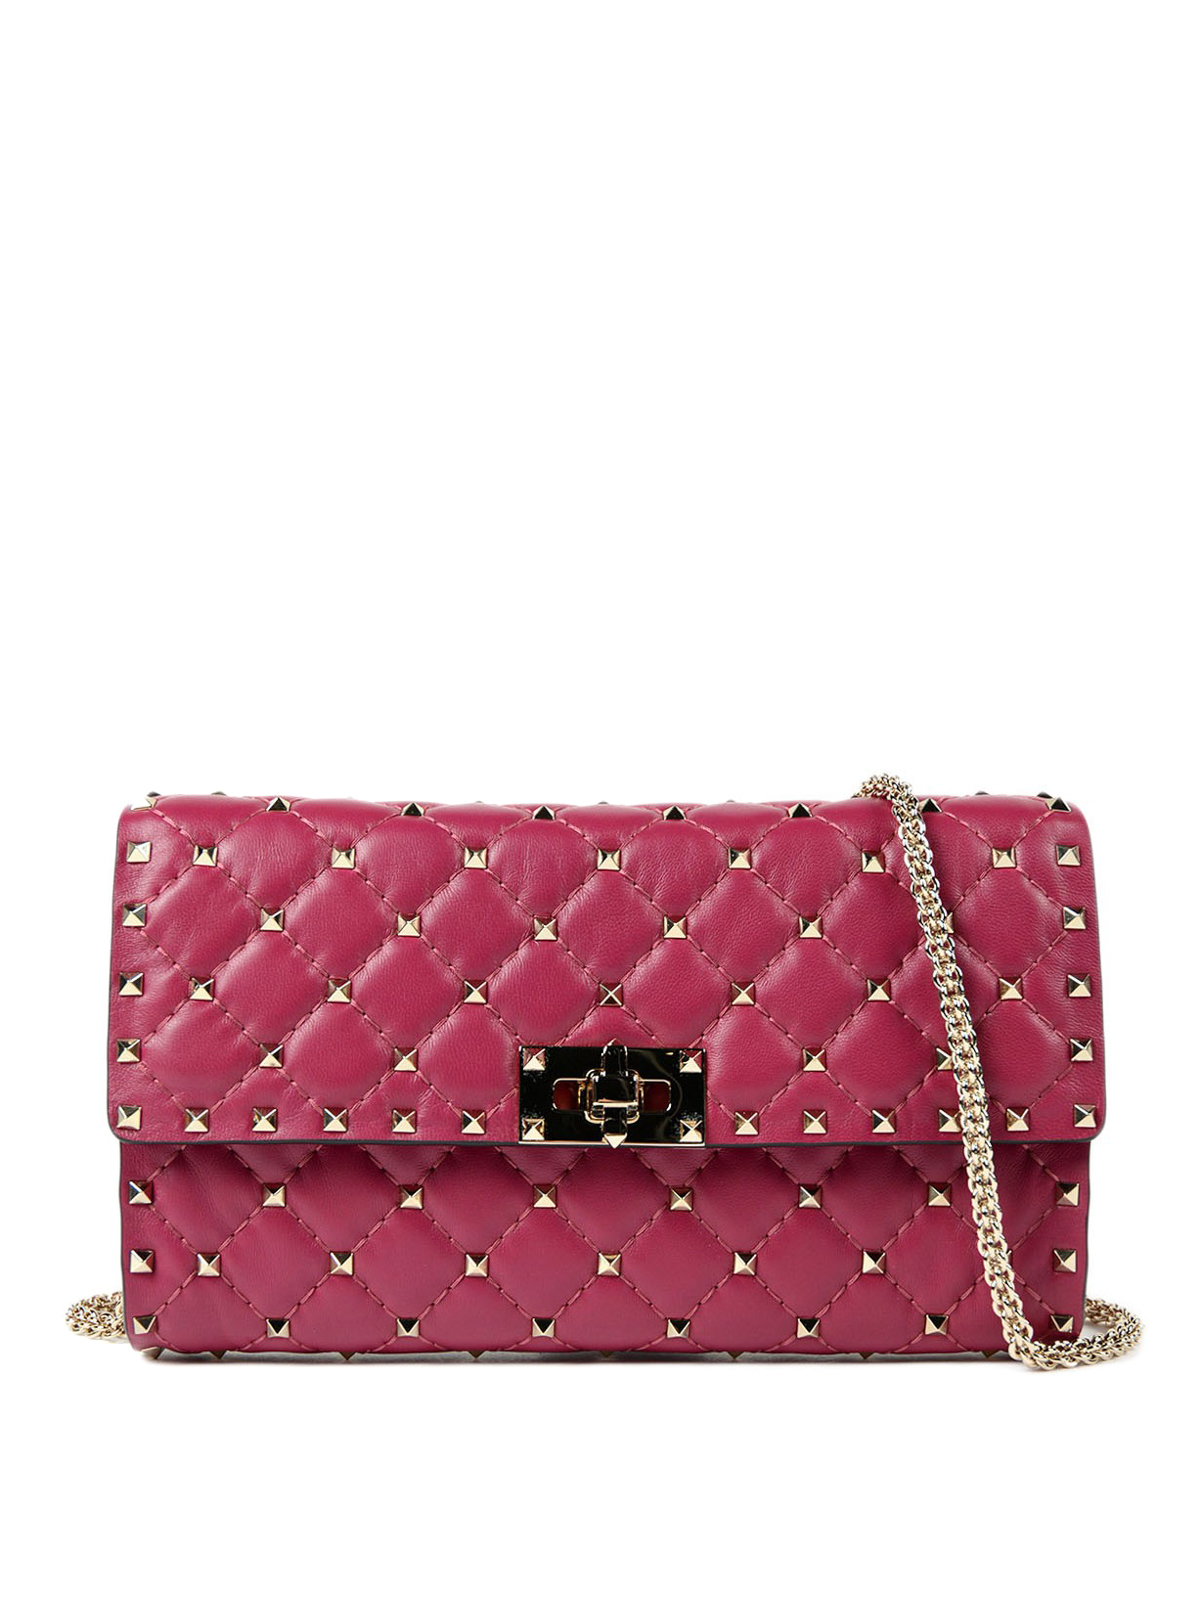 Valentino Soft Leather Fuchsia/Raspberry/Pink Tote with Flower Detail